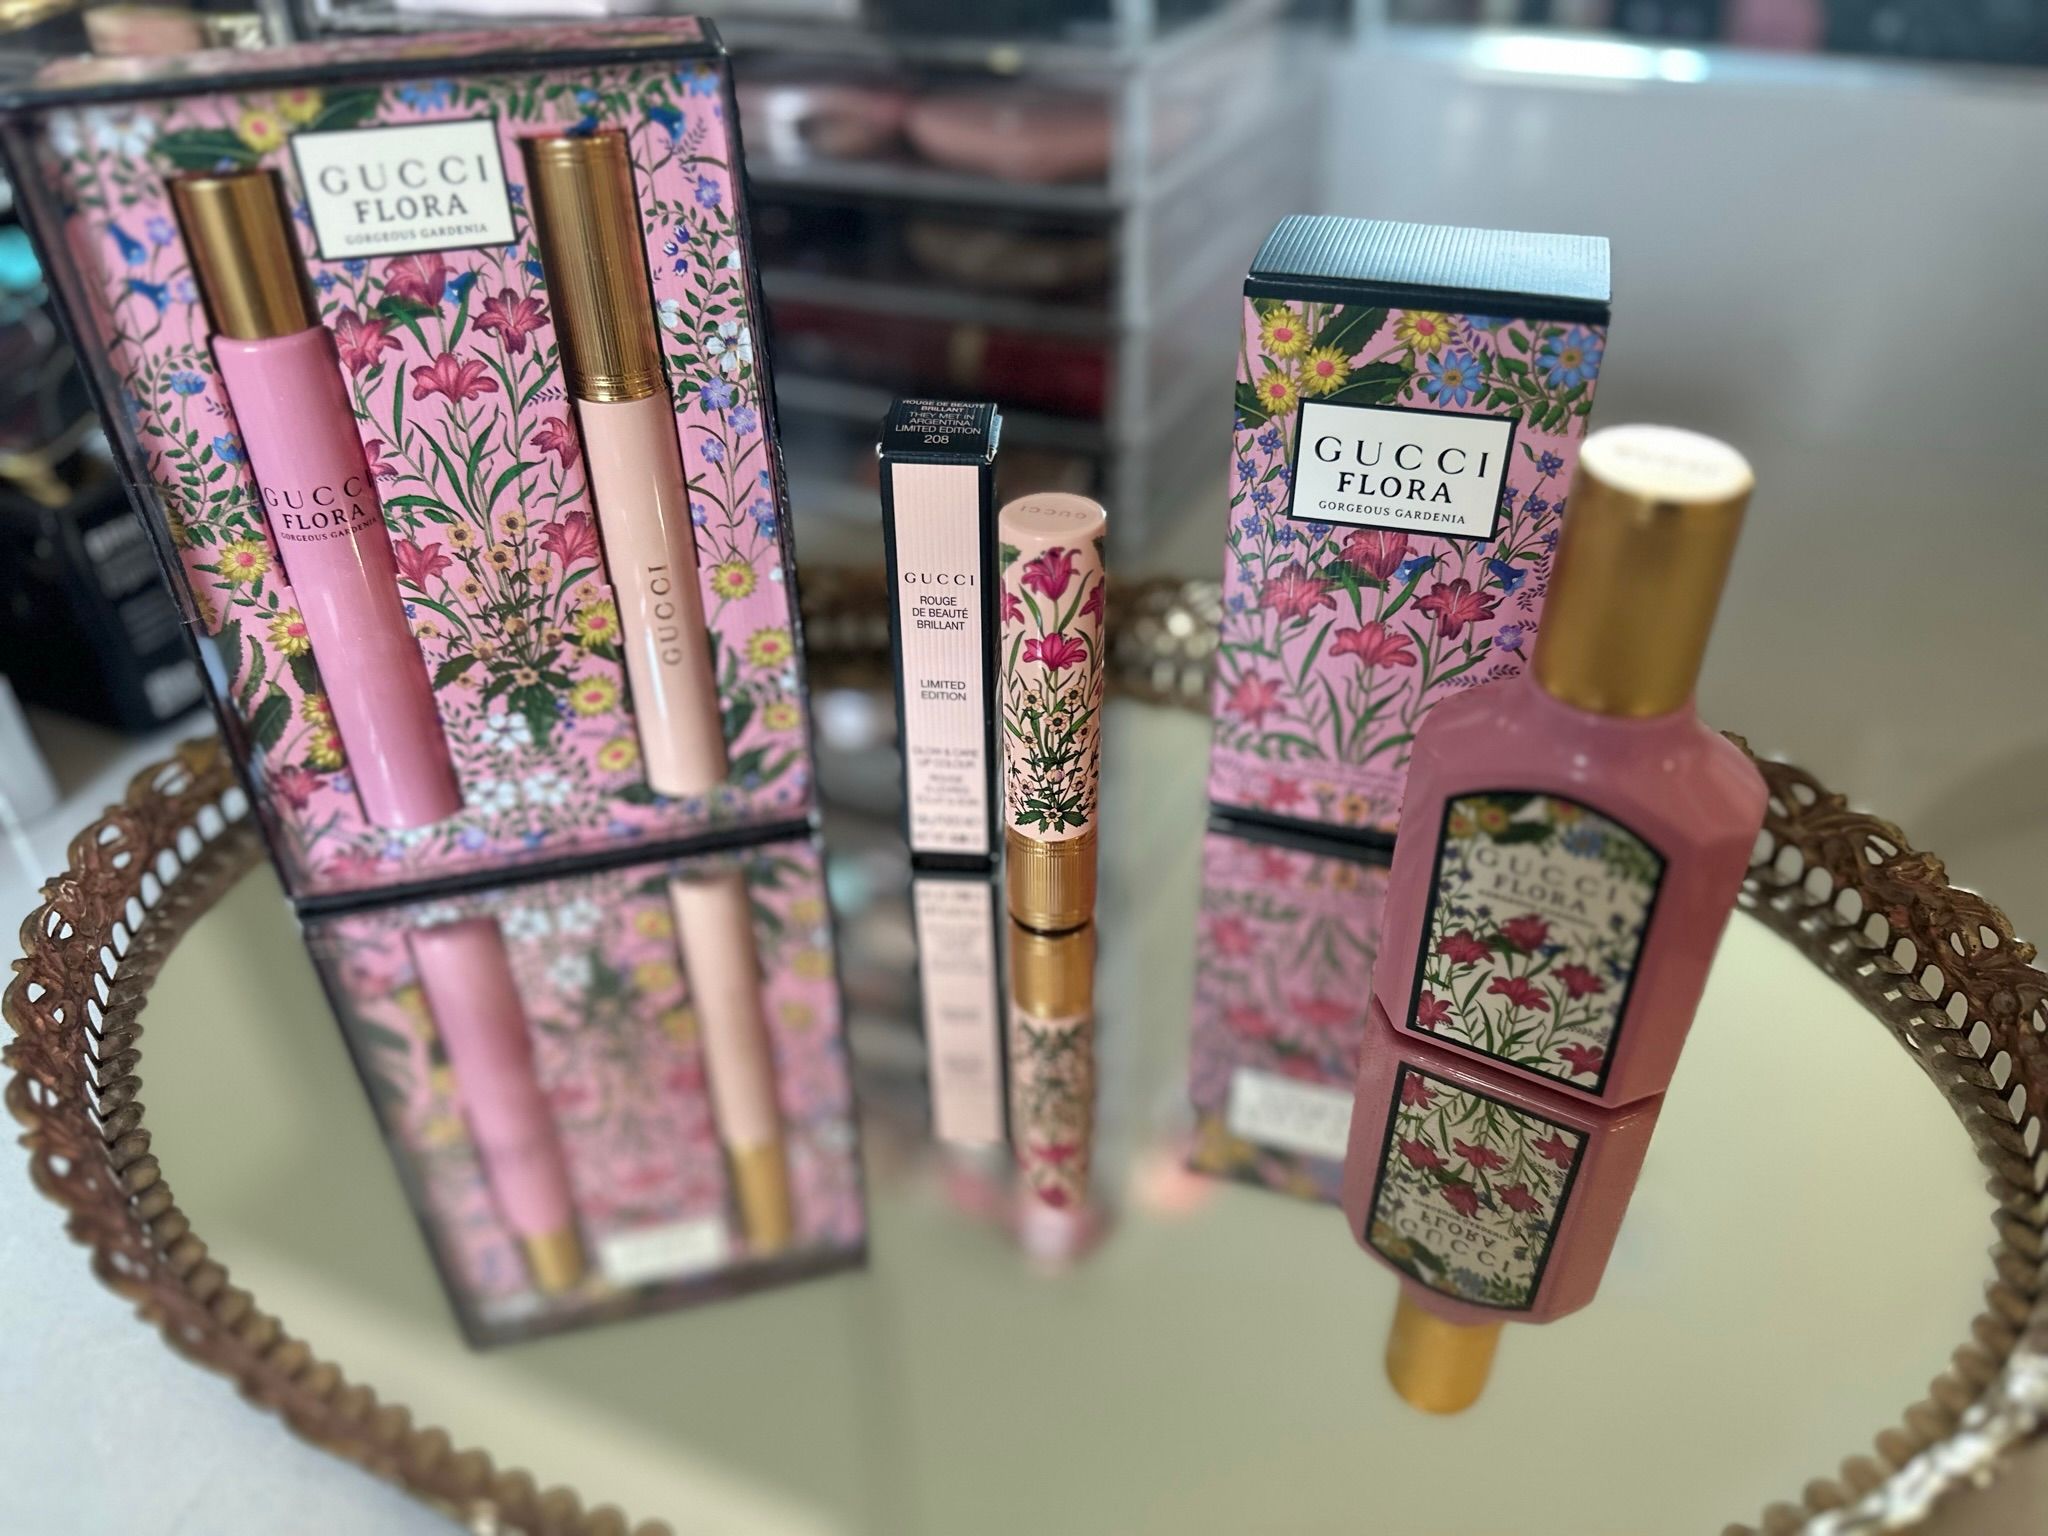 Re: The Gucci Beauty Thread - Beauty Insider Community